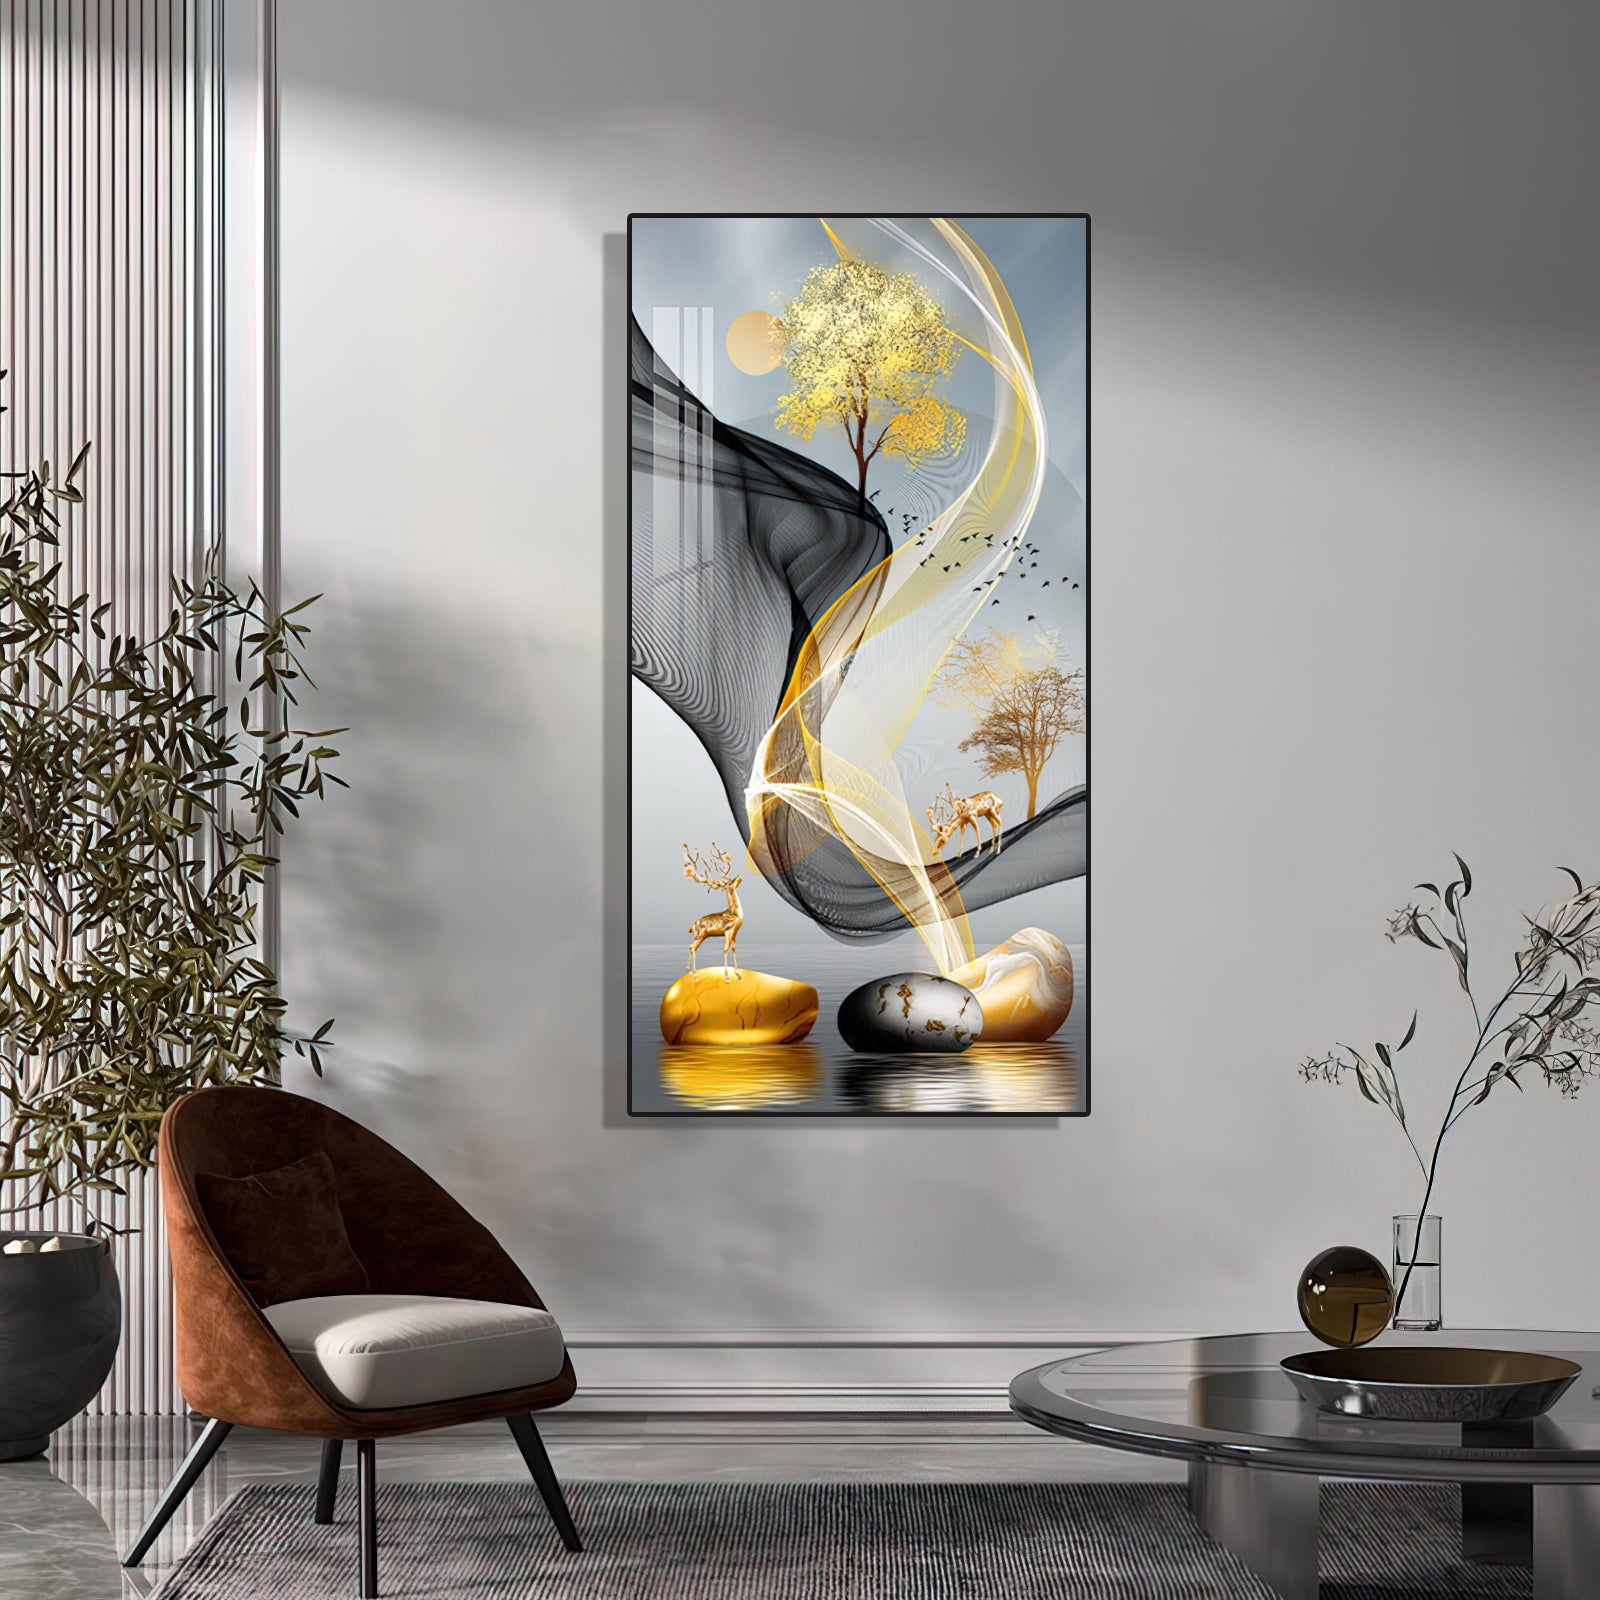 Trendy Wavy Golden Abstract Wall Painting - 50x100 cm Home Decor crystal porcelain Framed Large wall wall art wall accents